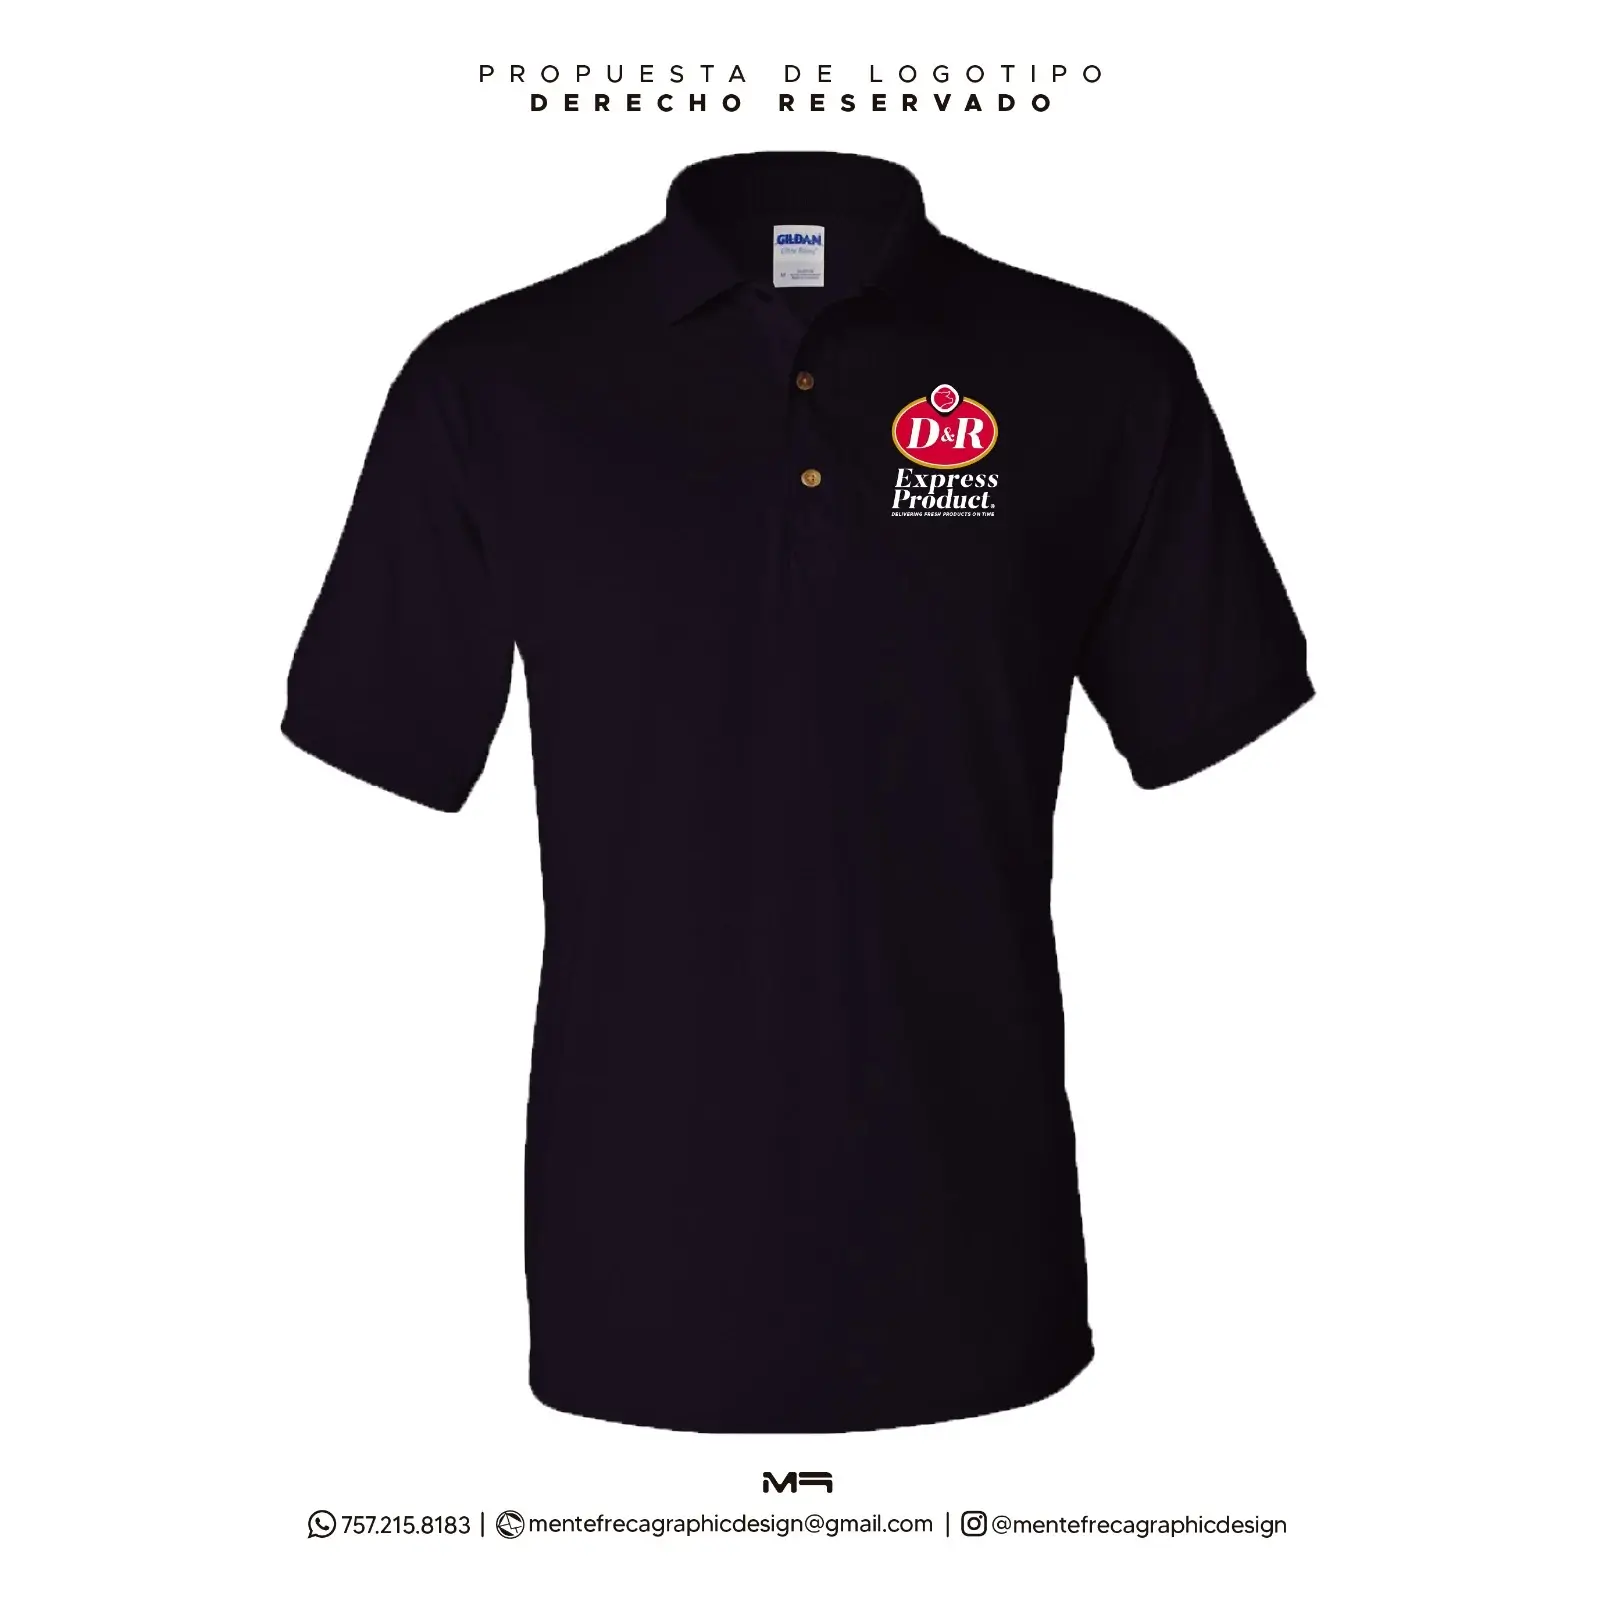 D&R Express Product Embroidery Polo